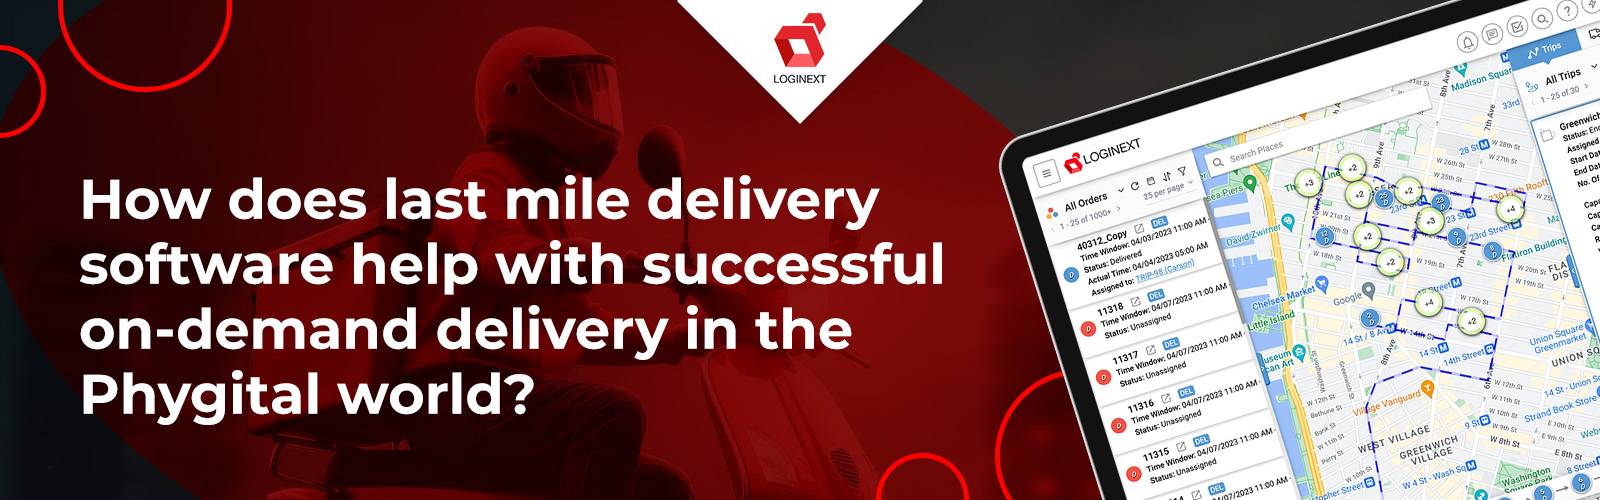 Phygital Supply Chain for last mile delivery